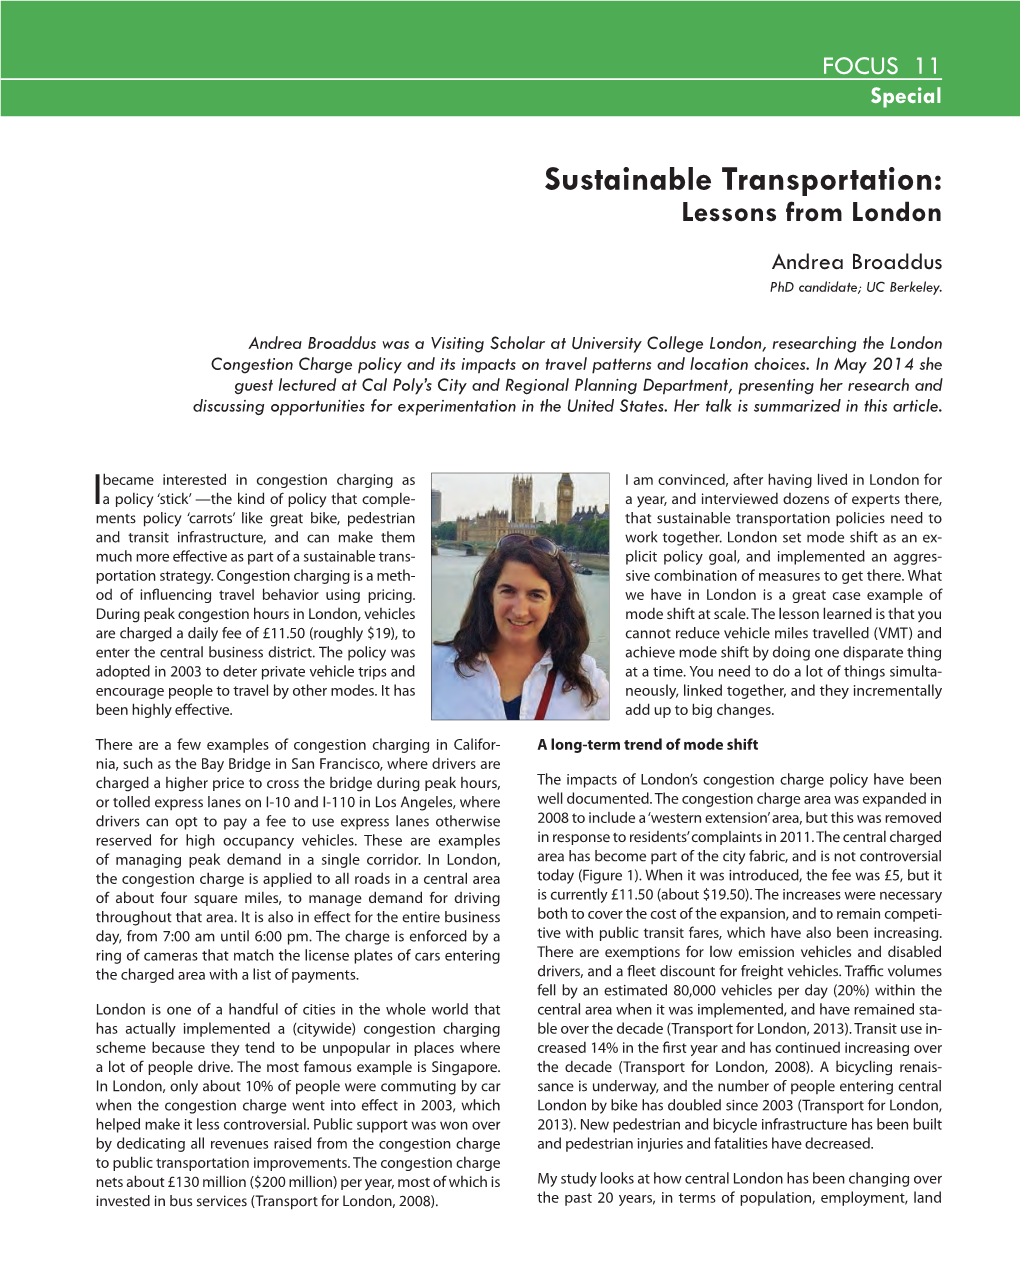 Sustainable Transportation: Lessons from London